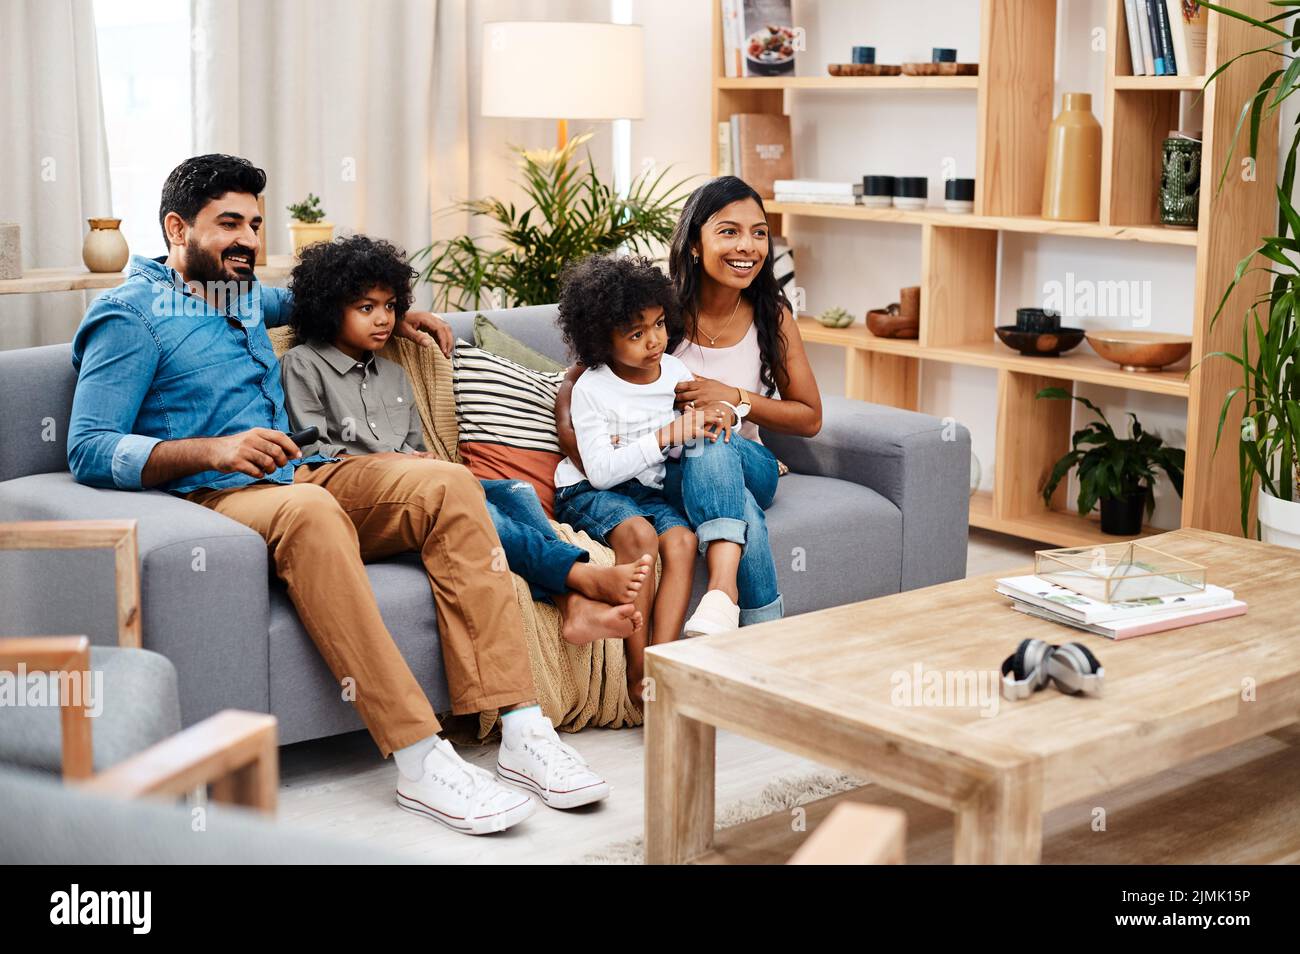 Watching movies is a family activity. Full length shot of a beautiful young family sitting on sofa and watching tv together at home. Stock Photo